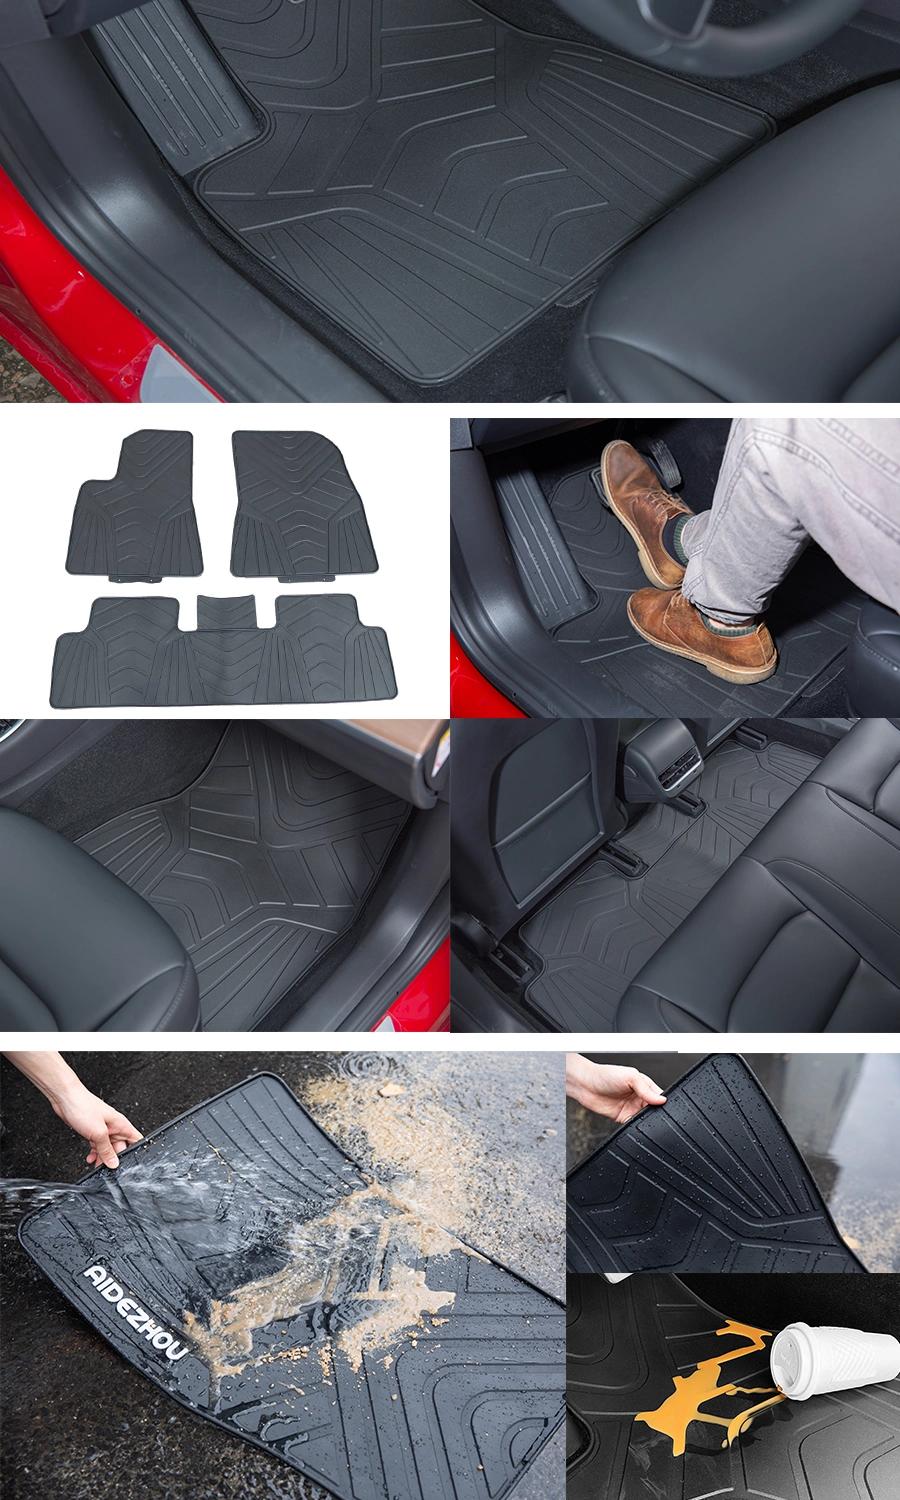 Custom Fit All Weather Car Floor Mats for BMW F30